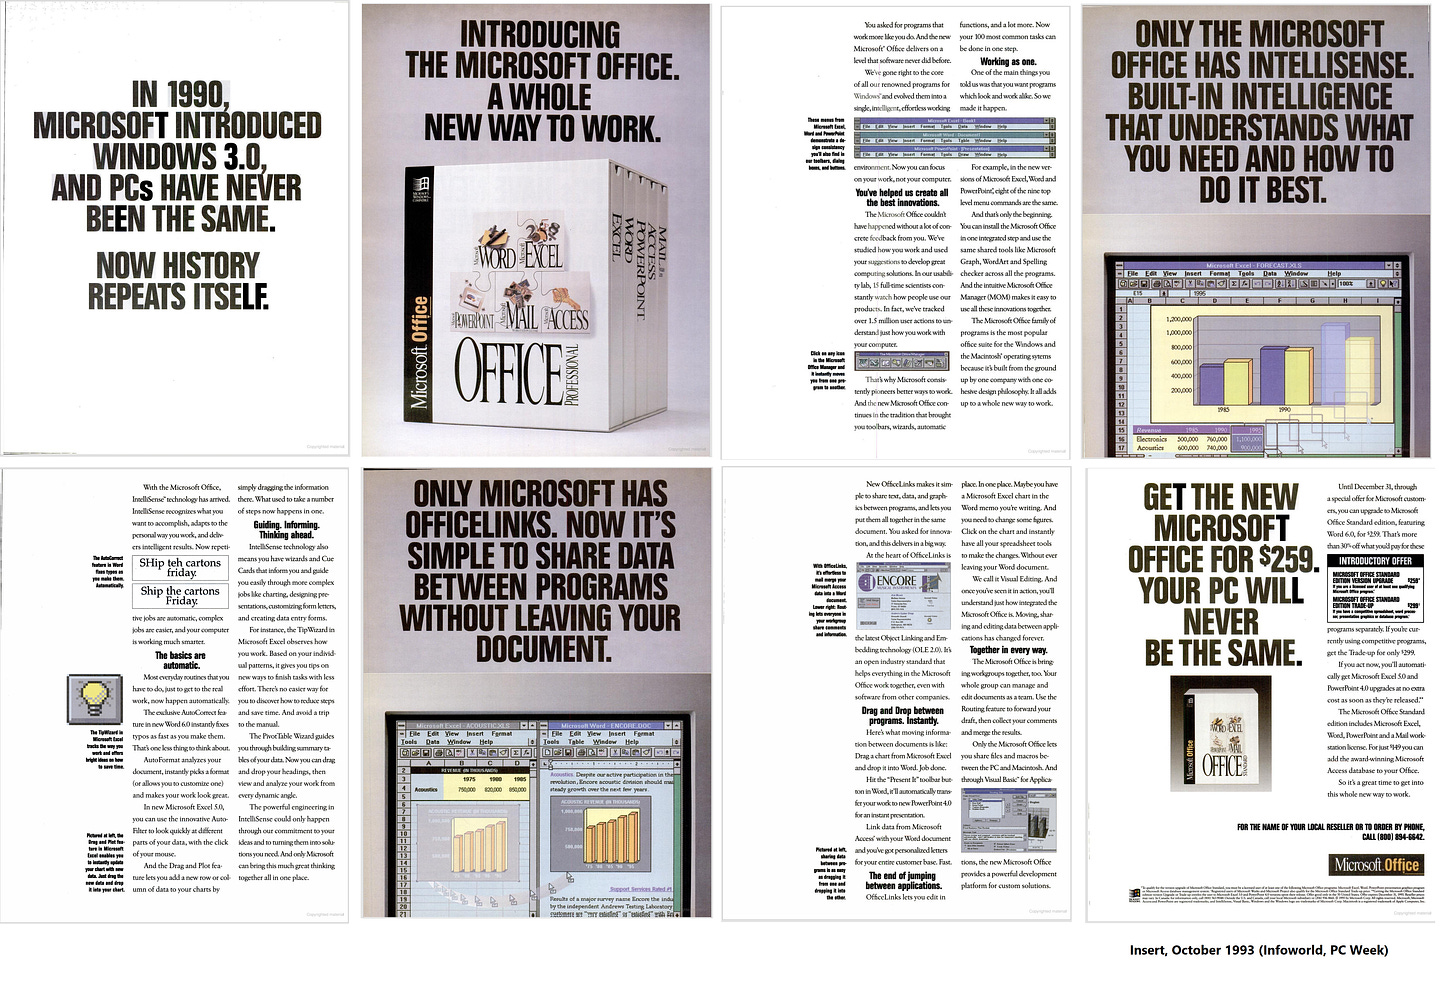 Scan of a 6 page insert in a large format trade publication describing the virtues of Office "A Whole New Way To Work".  This from October 1993.